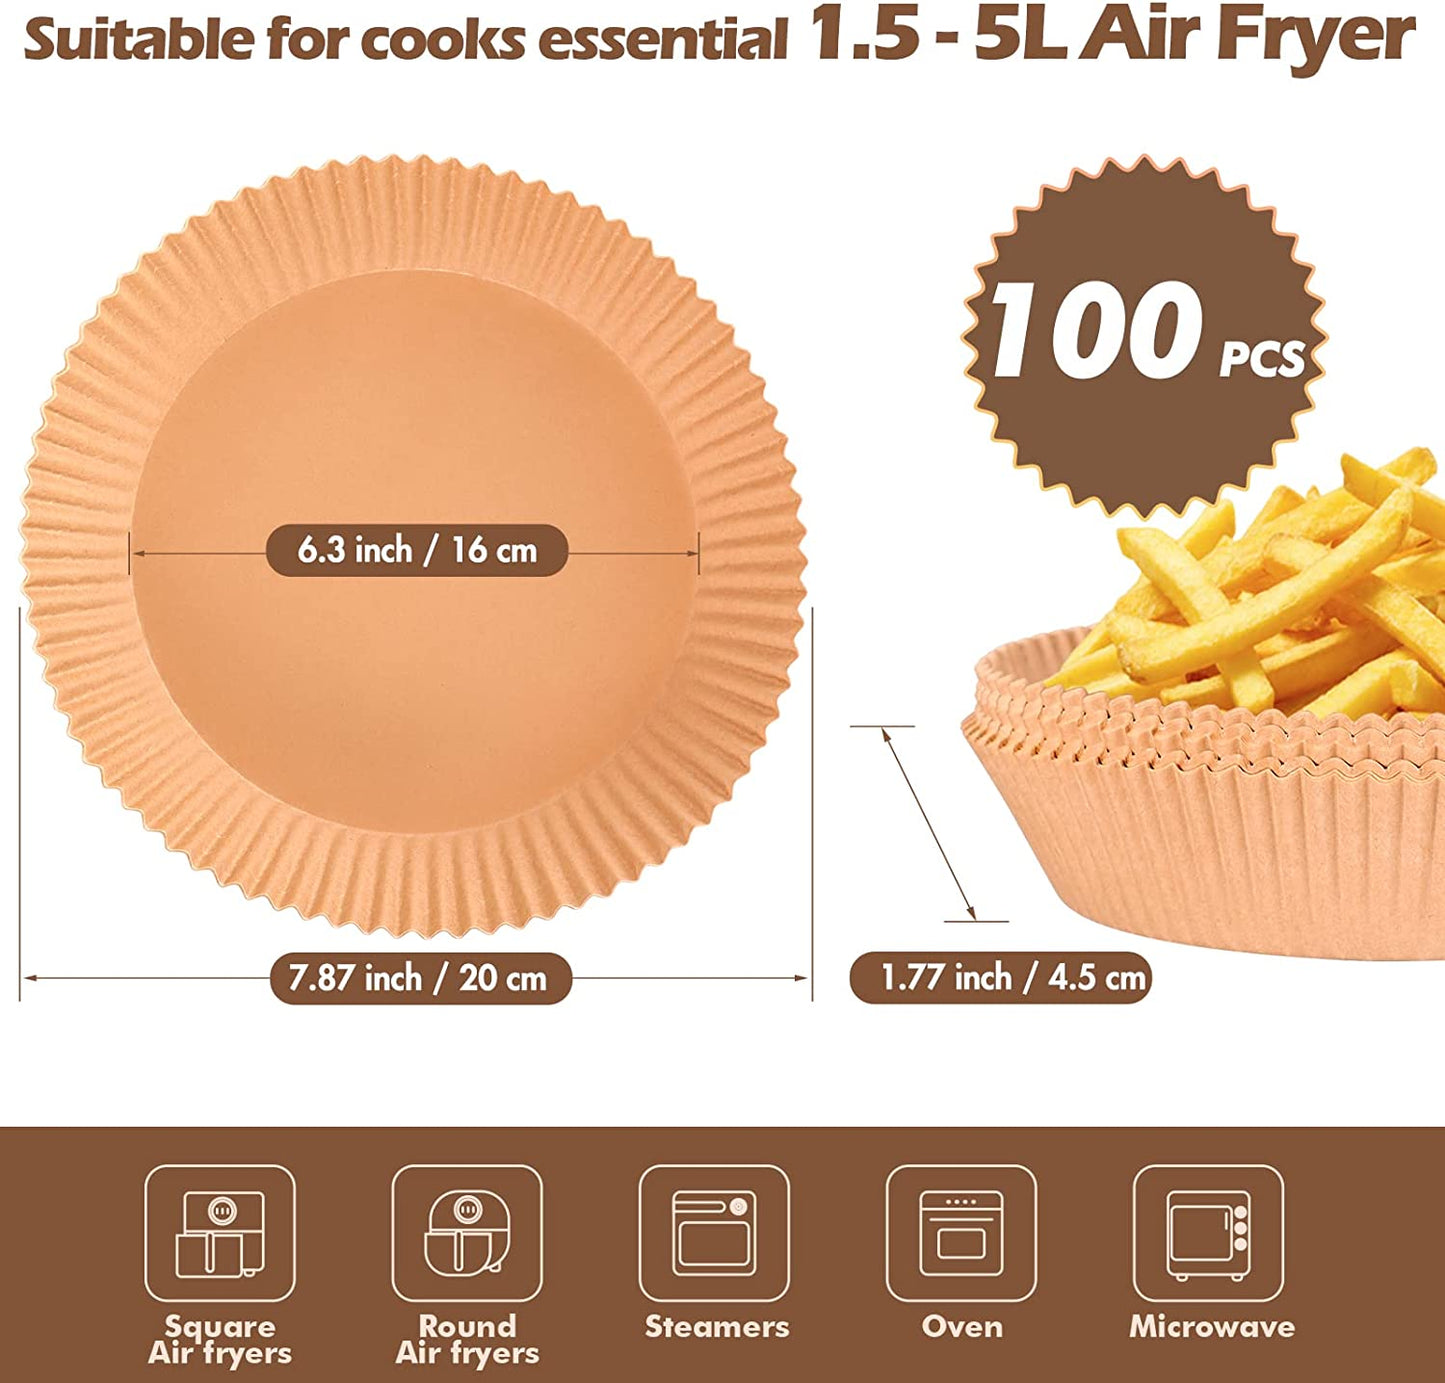 Air Fryer Disposable Paper Liner, 100pcs Non-Stick Disposable Liners, Baking Paper for Air Fryer Oil-Proof, Water-proof, Food Grade Parchment for